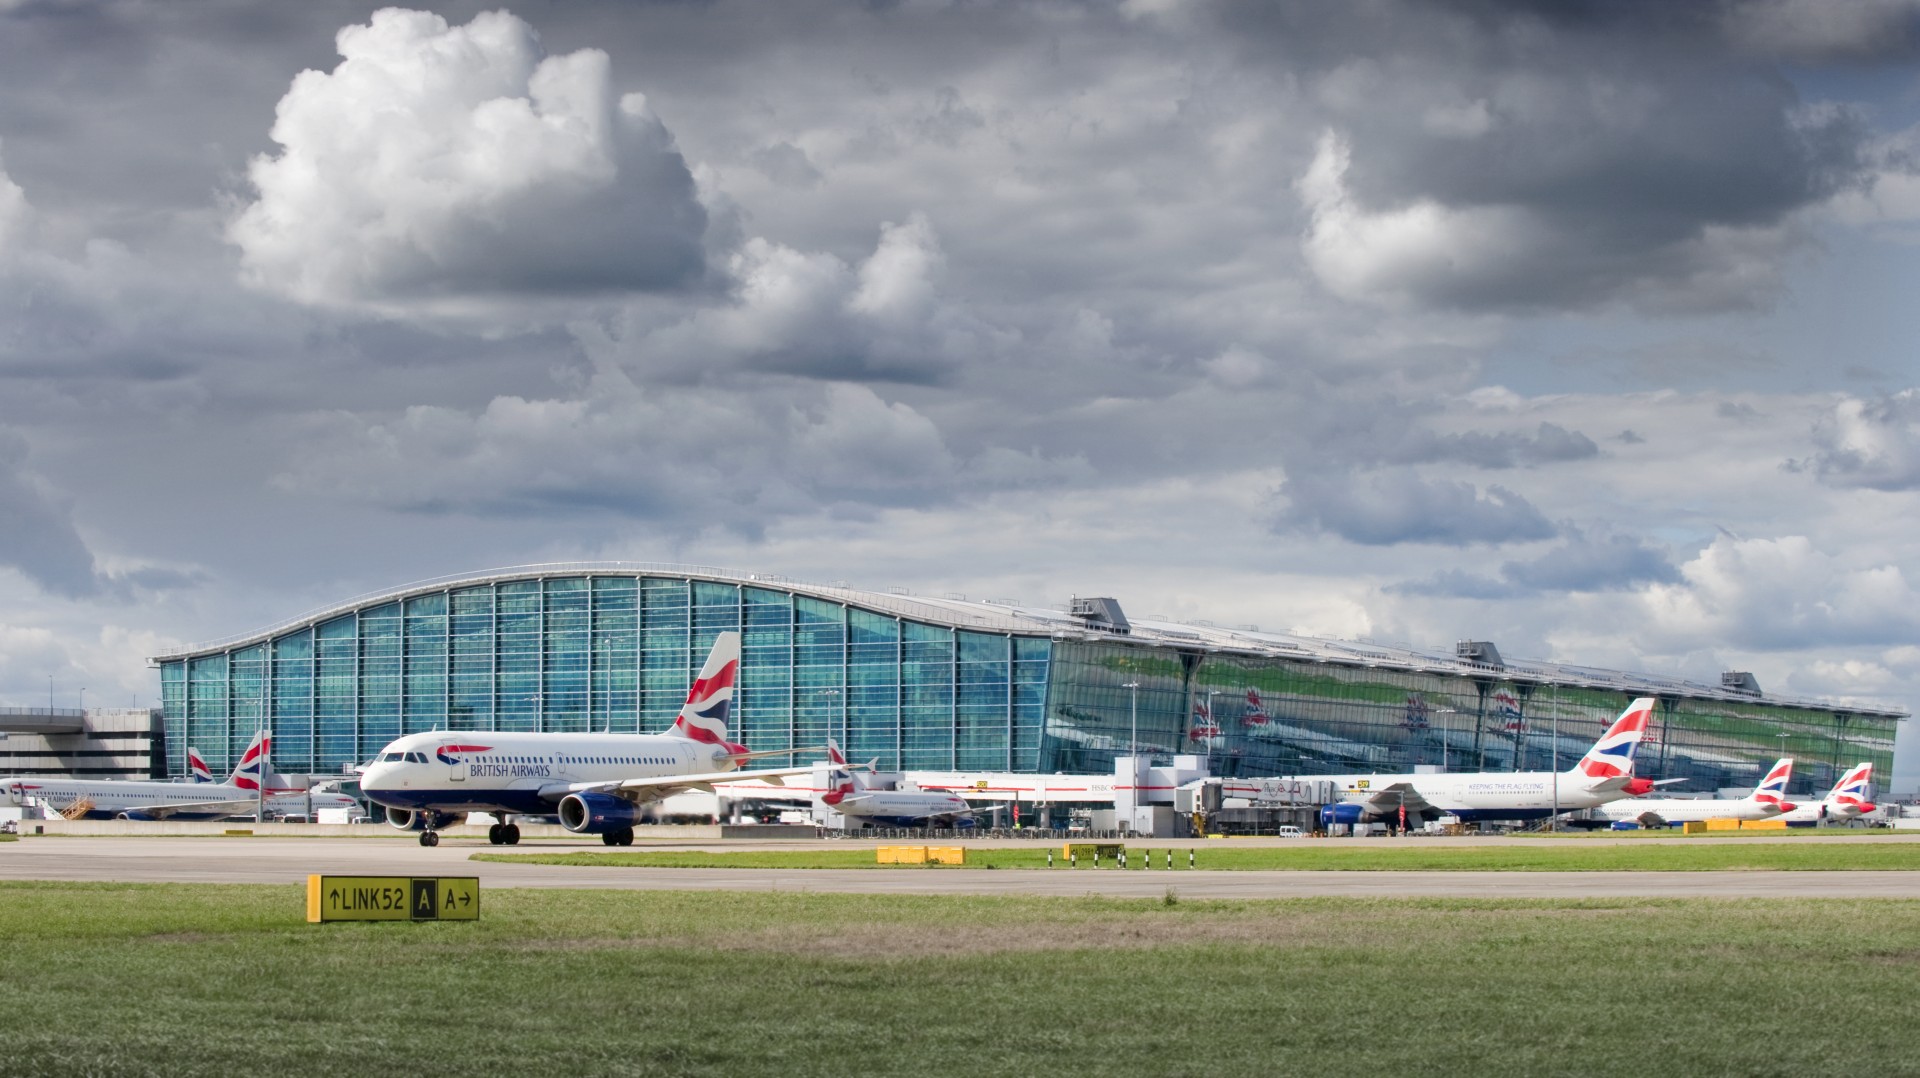 Heathrow invests £50 million in new ‘cutting-edge’ security equipment